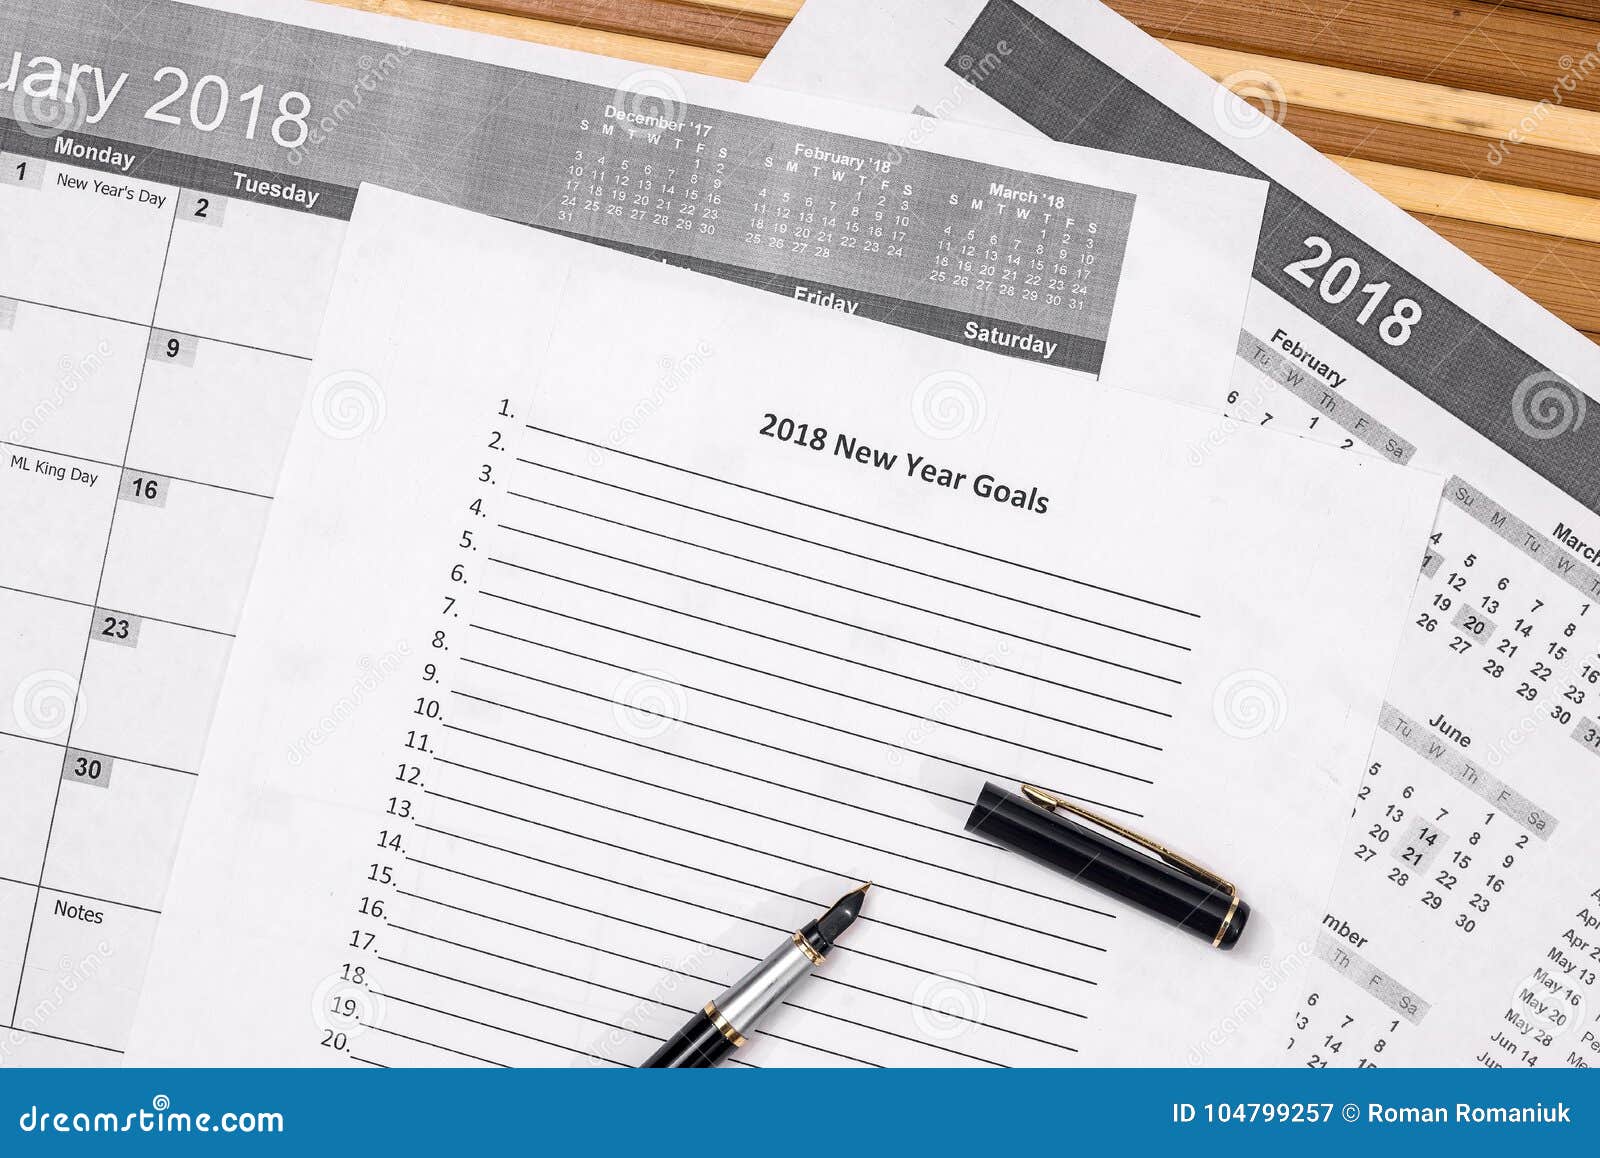 2018 New Year Goals with Calendar. Stock Image Image of resolution